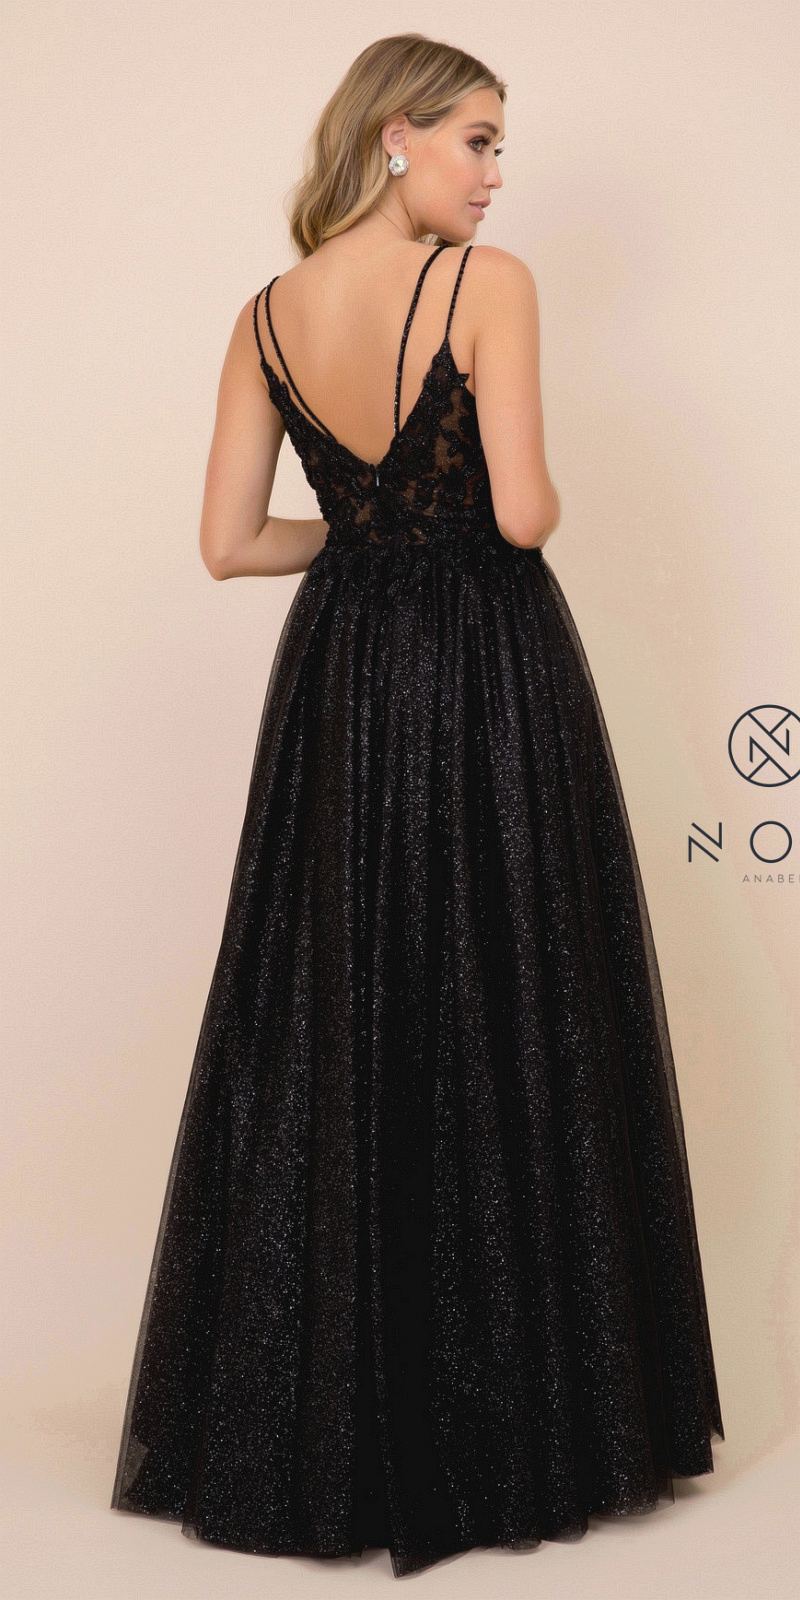 Nox Anabel T407 Full Length Formal Dress Black A-Line Embroidered Bodice